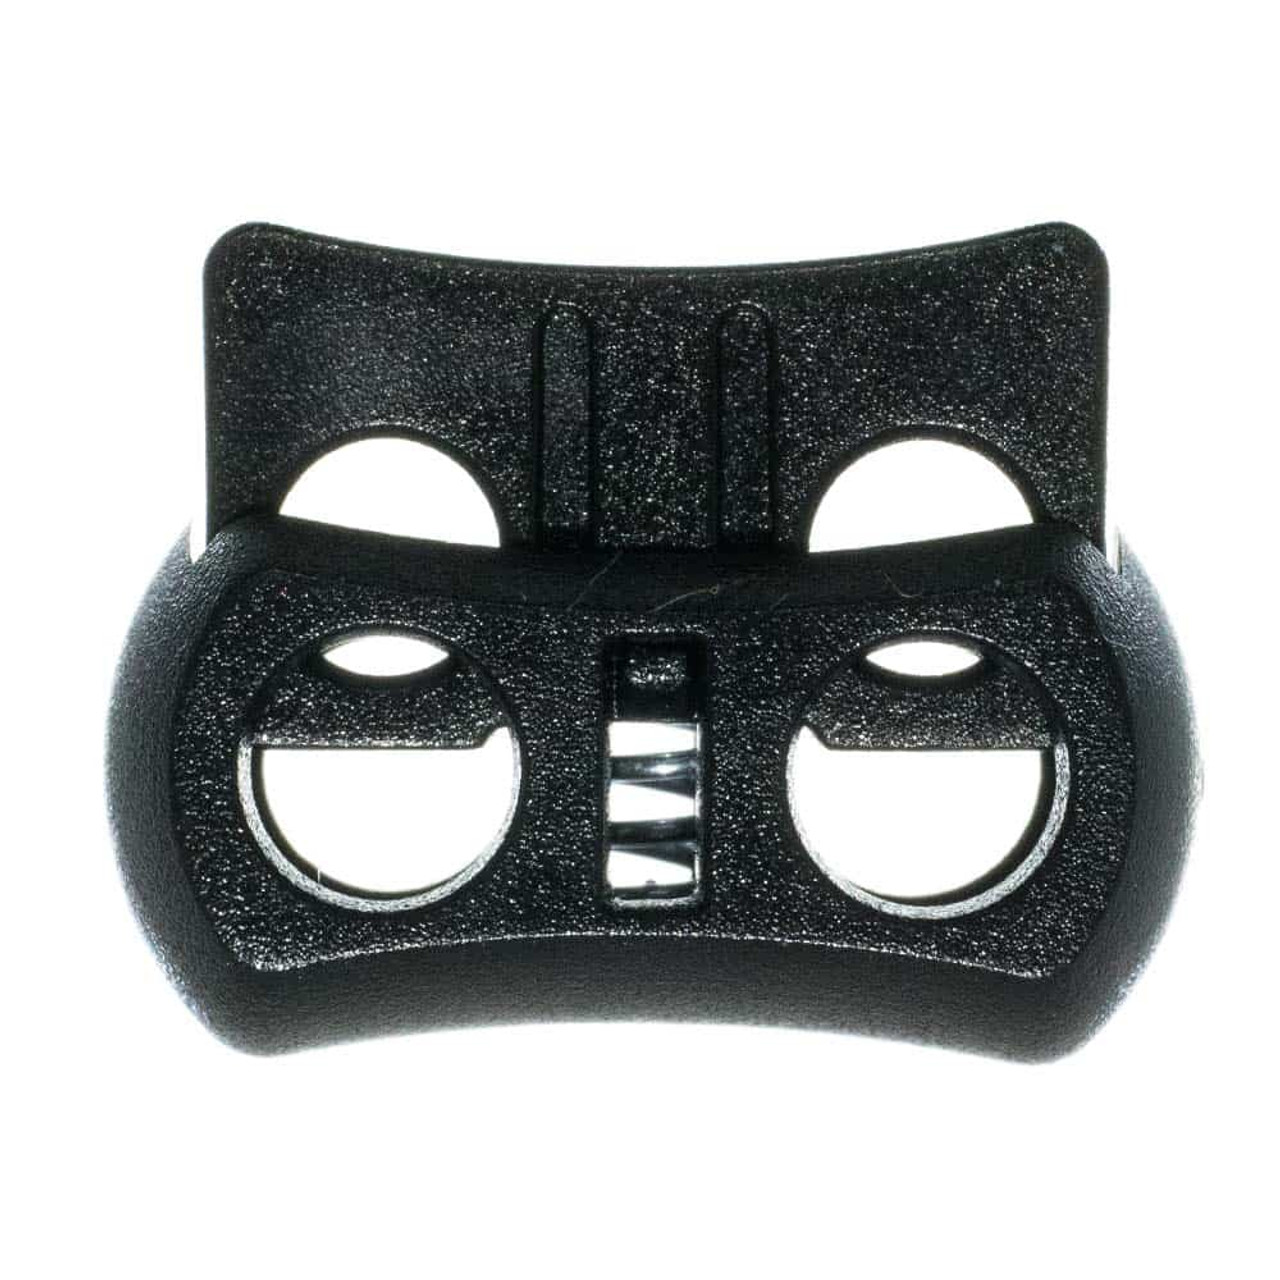 100 Pack Black Paracord Cord Lock Clamp 2 Hole Toggle Clip Stopper  Accessories p